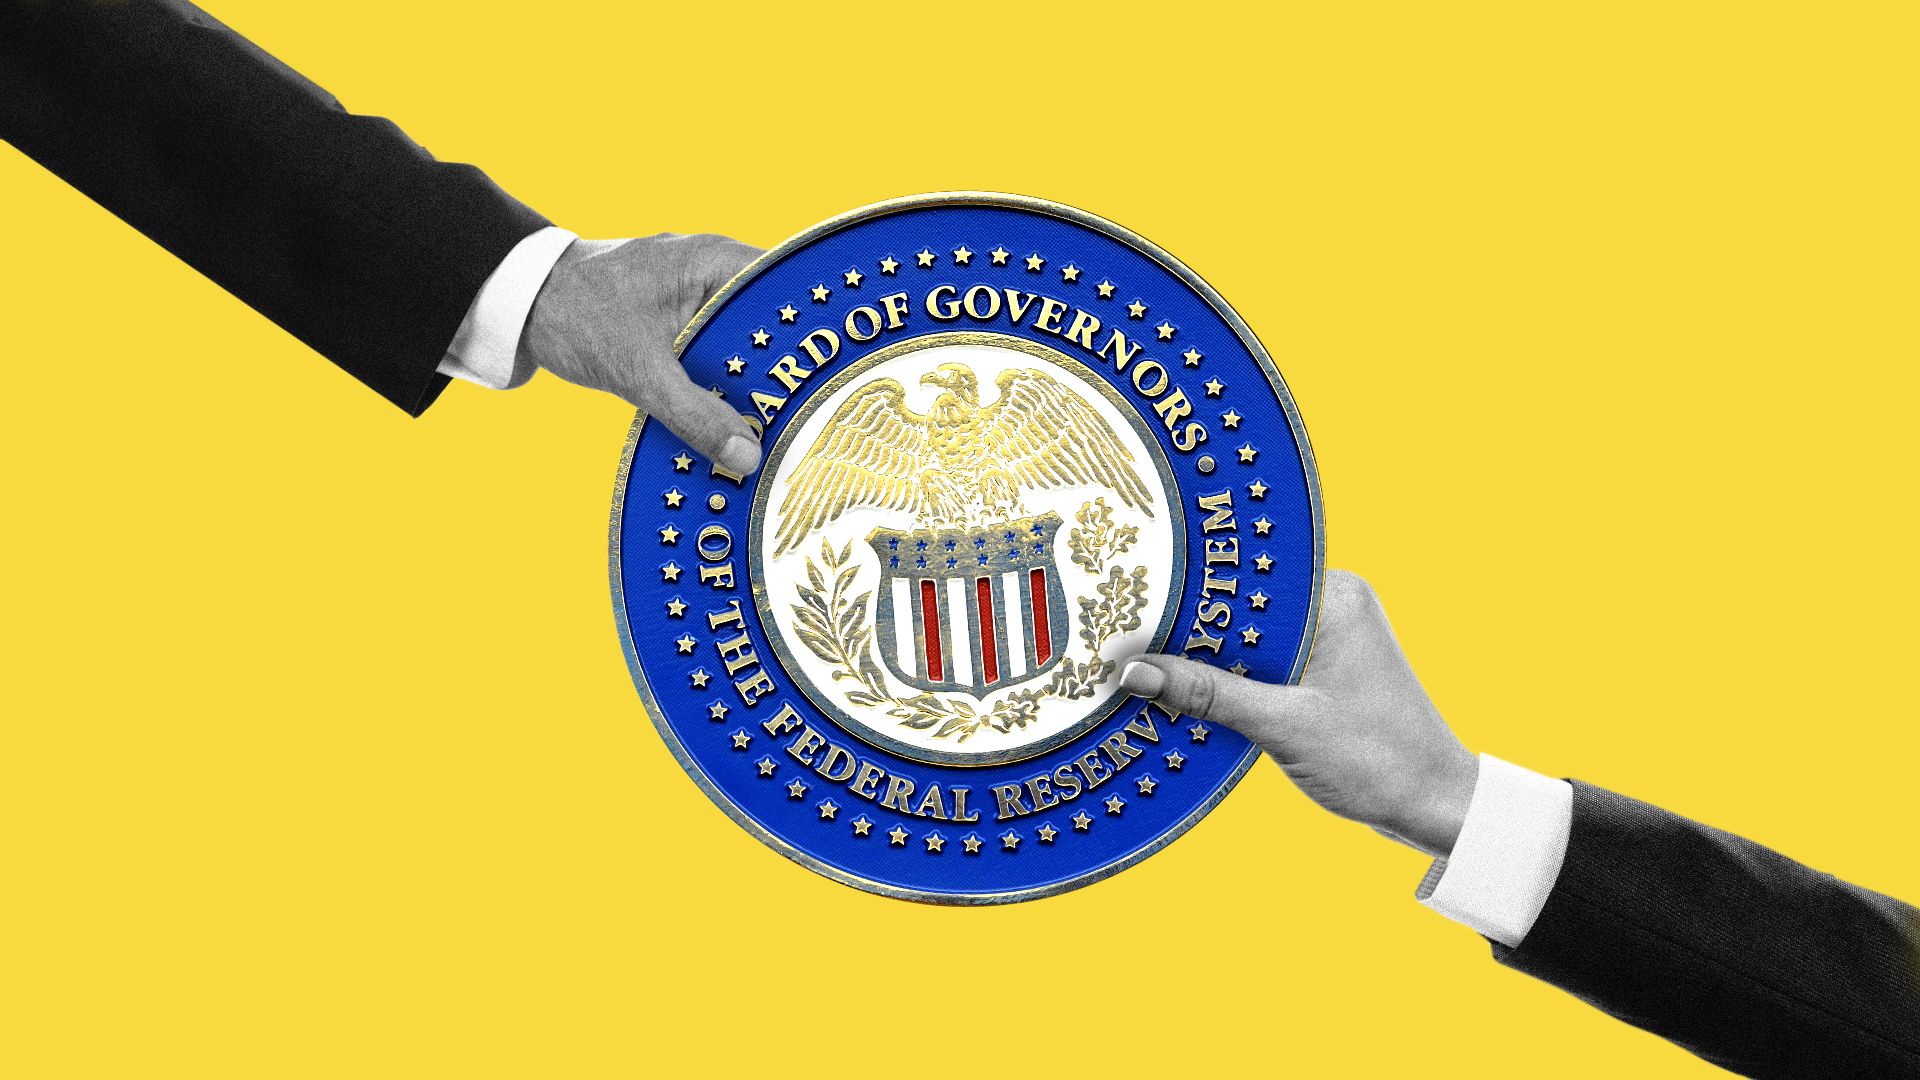 Illustration of two hands pulling The Fed logo in opposing directions.  